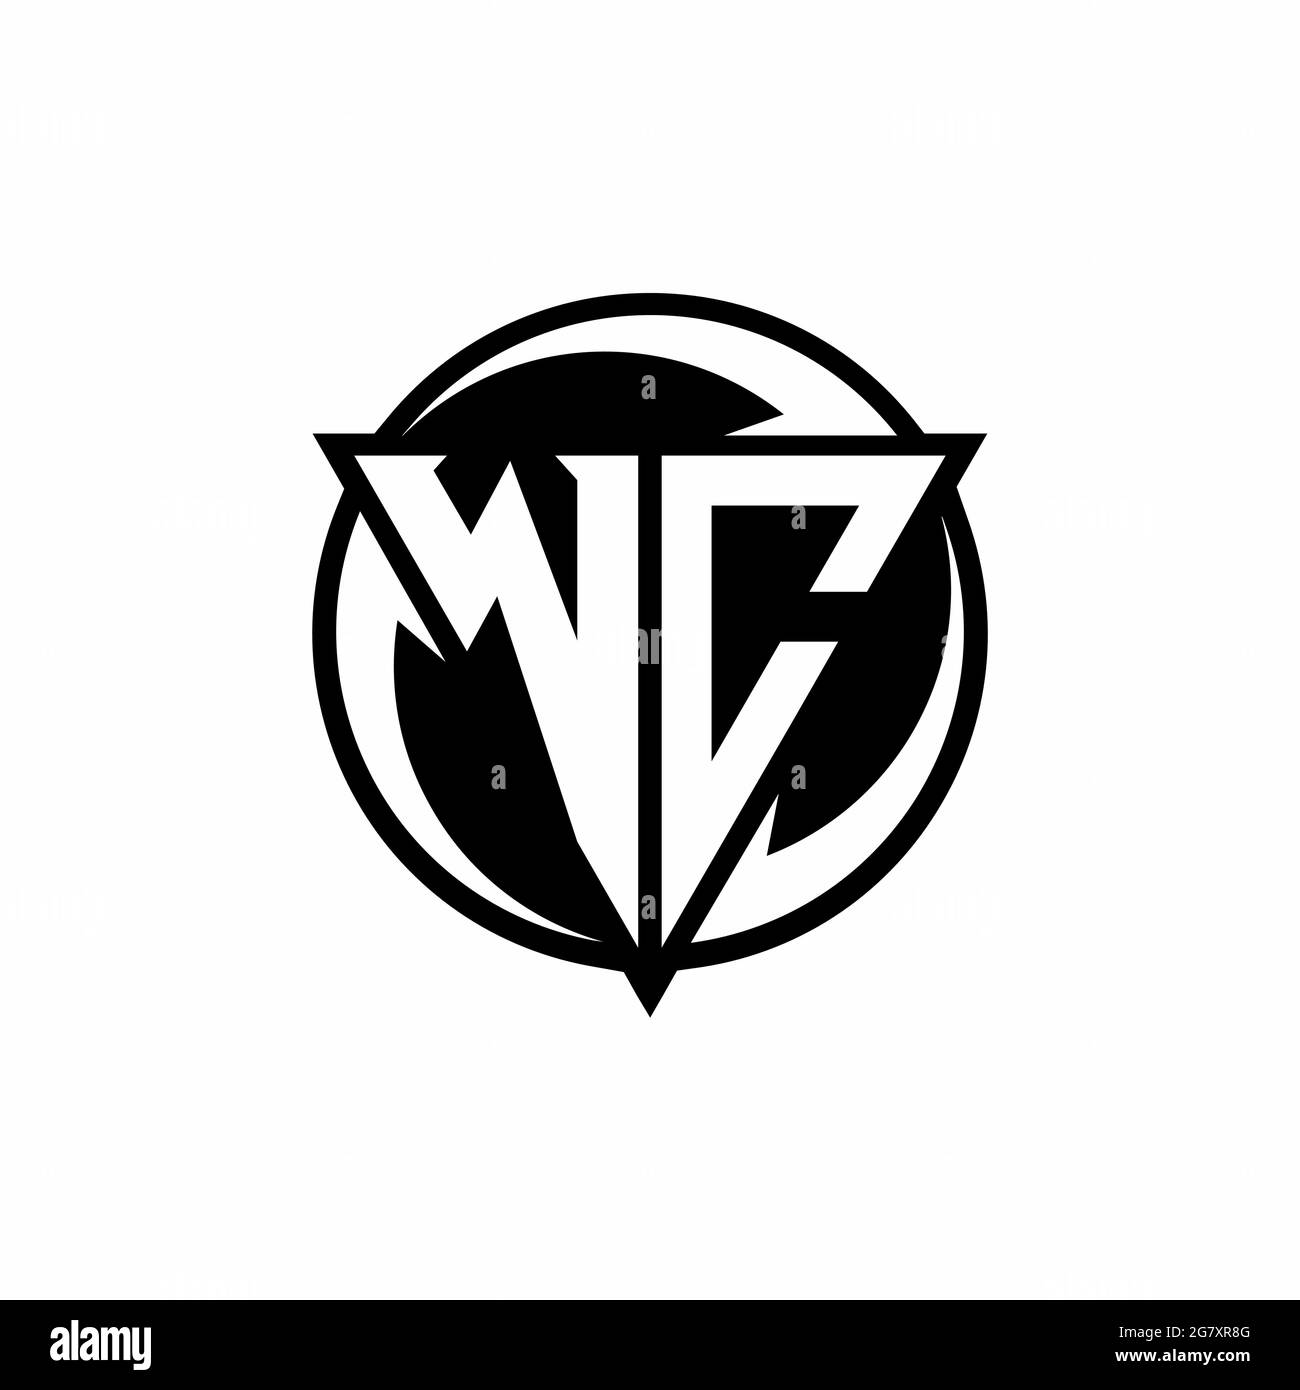 Wc logo Black and White Stock Photos & Images - Alamy